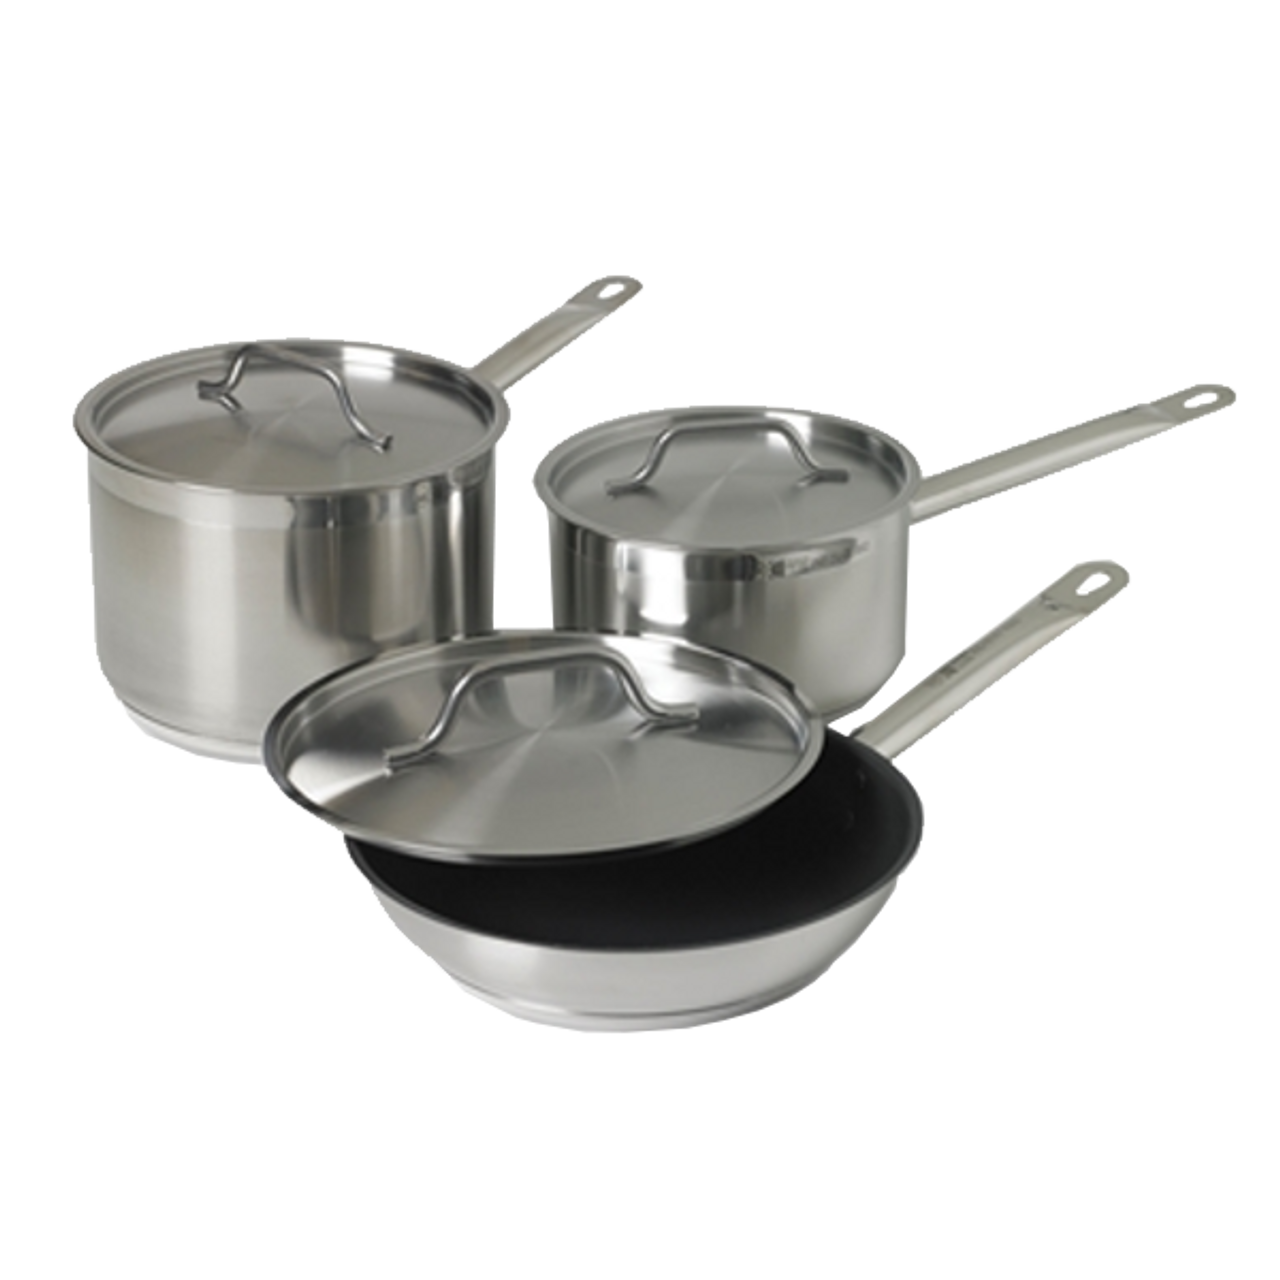 Vollrath 3820 Opti Induction 6 Piece Commercial Cookware Set